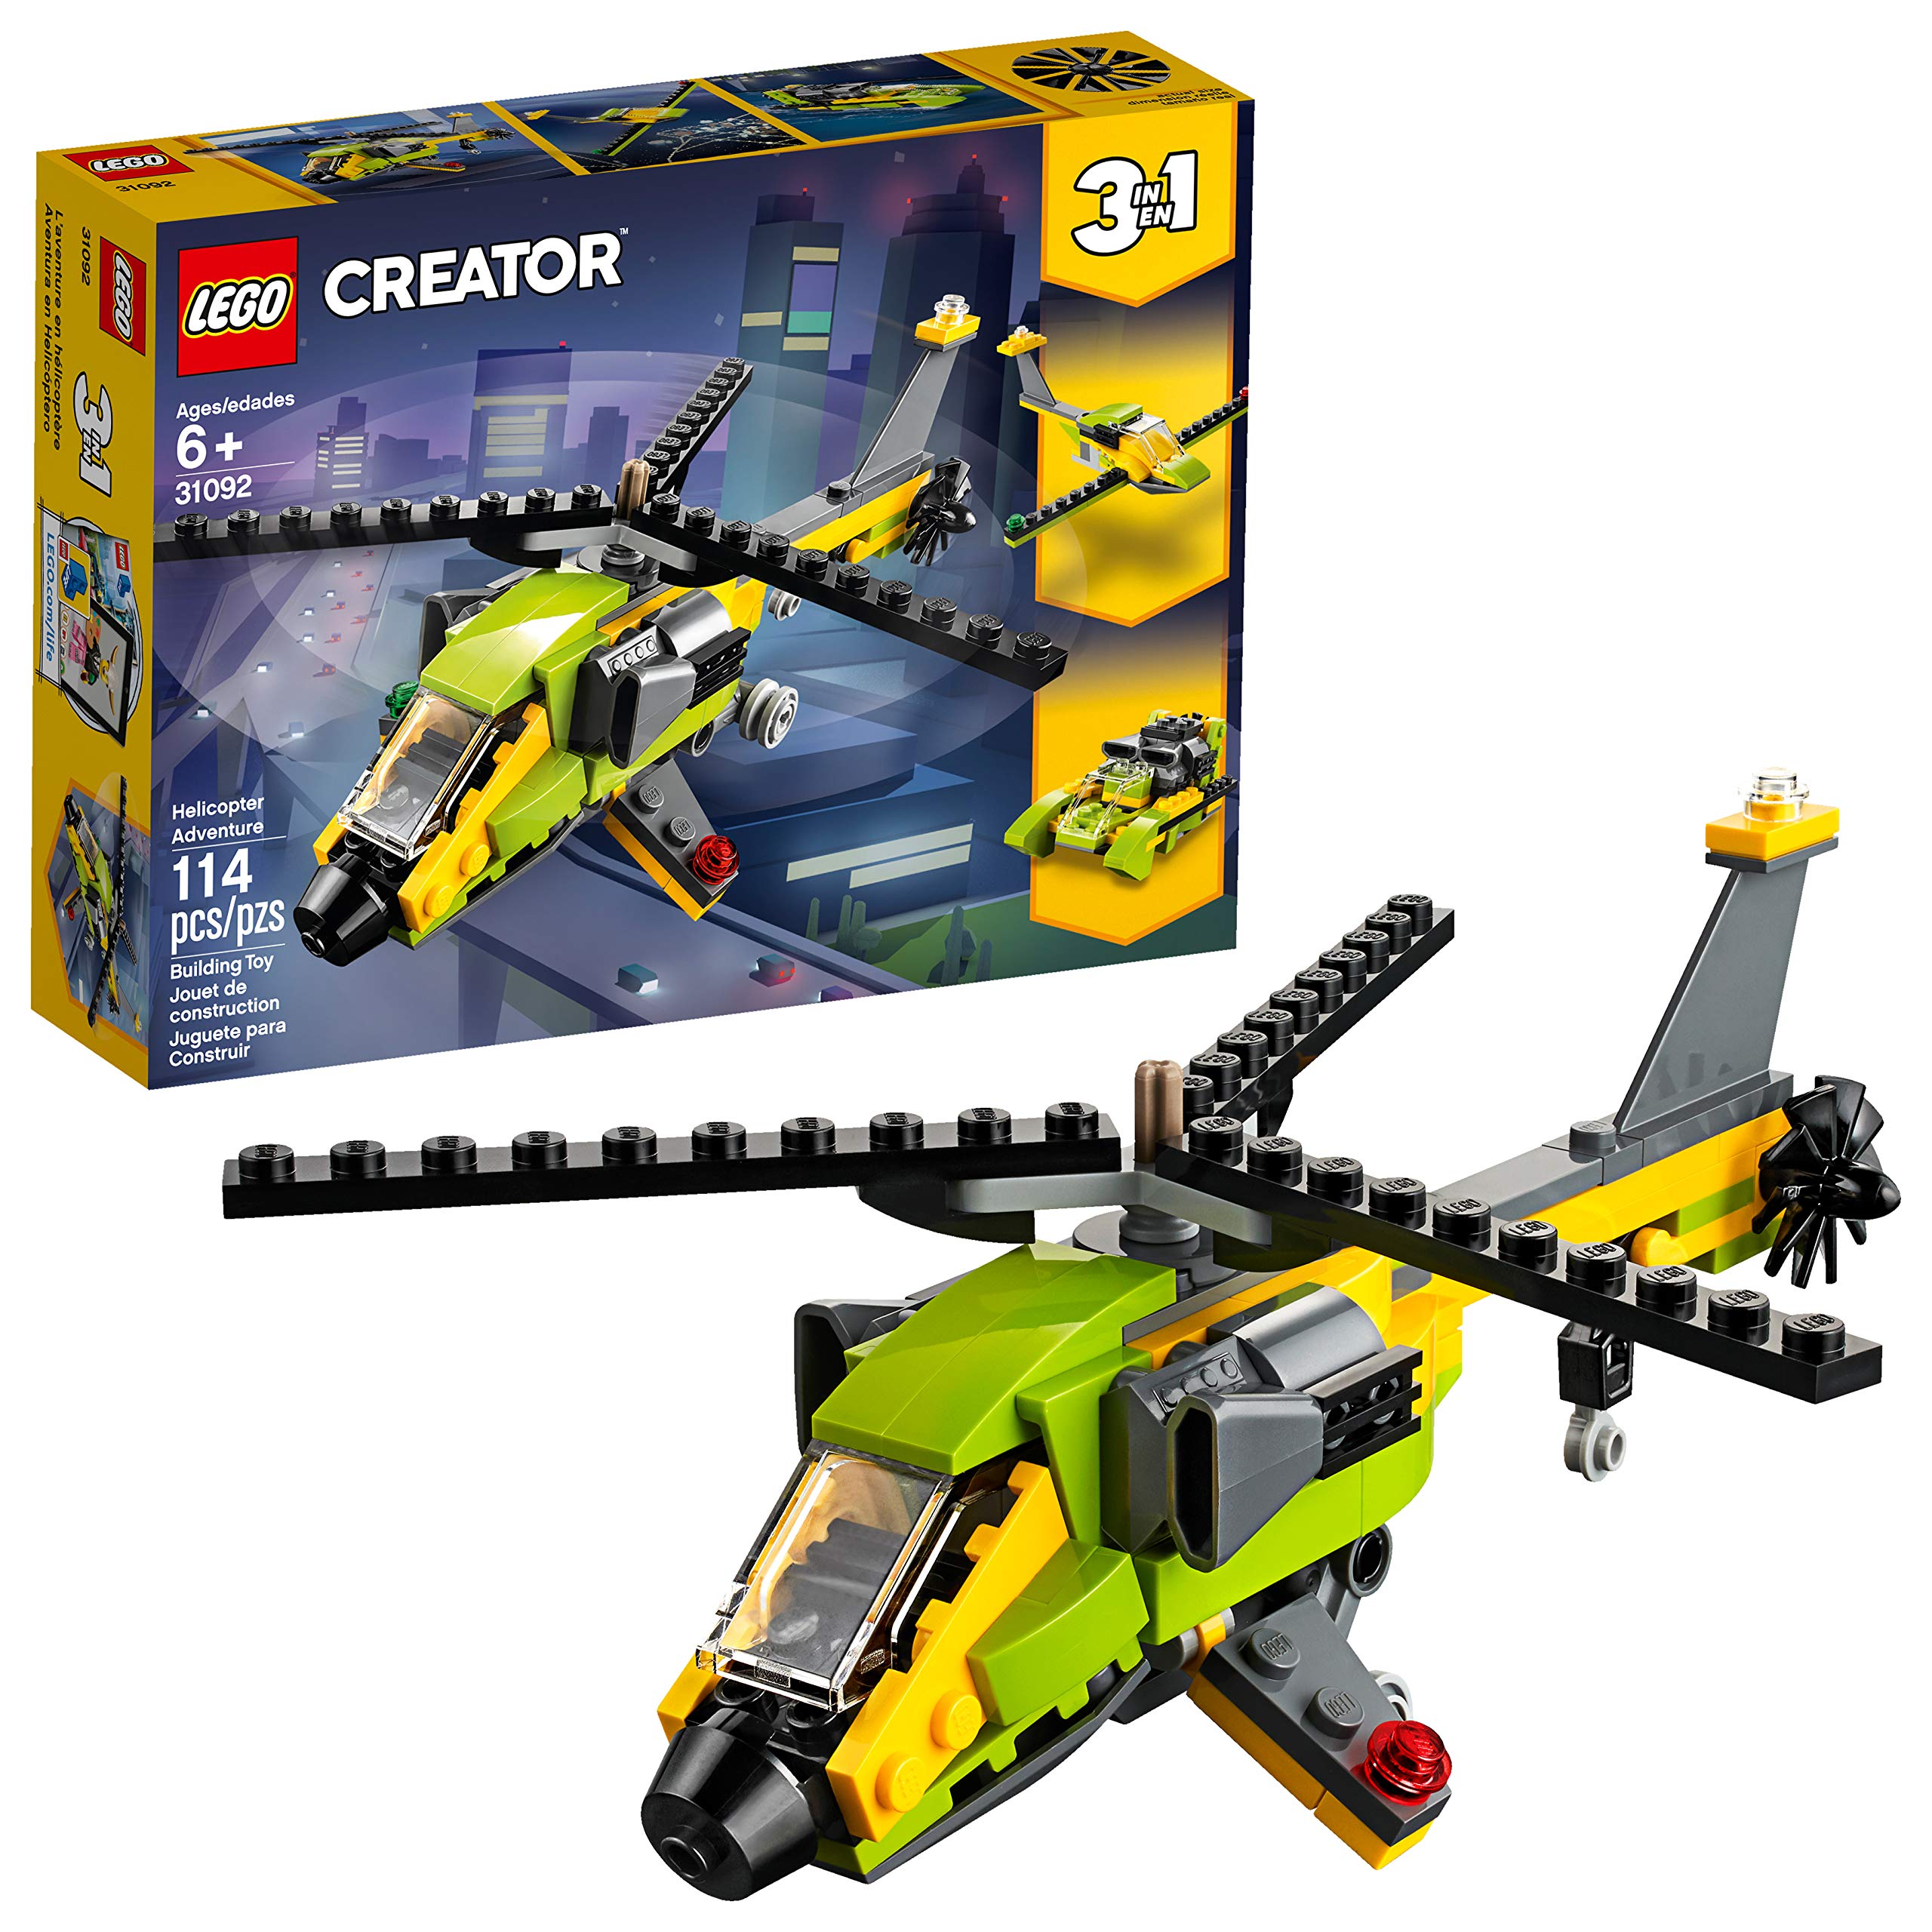 LEGO Creator 3in1 Helicopter Adventure 31092 Building Kit (114 Pieces)